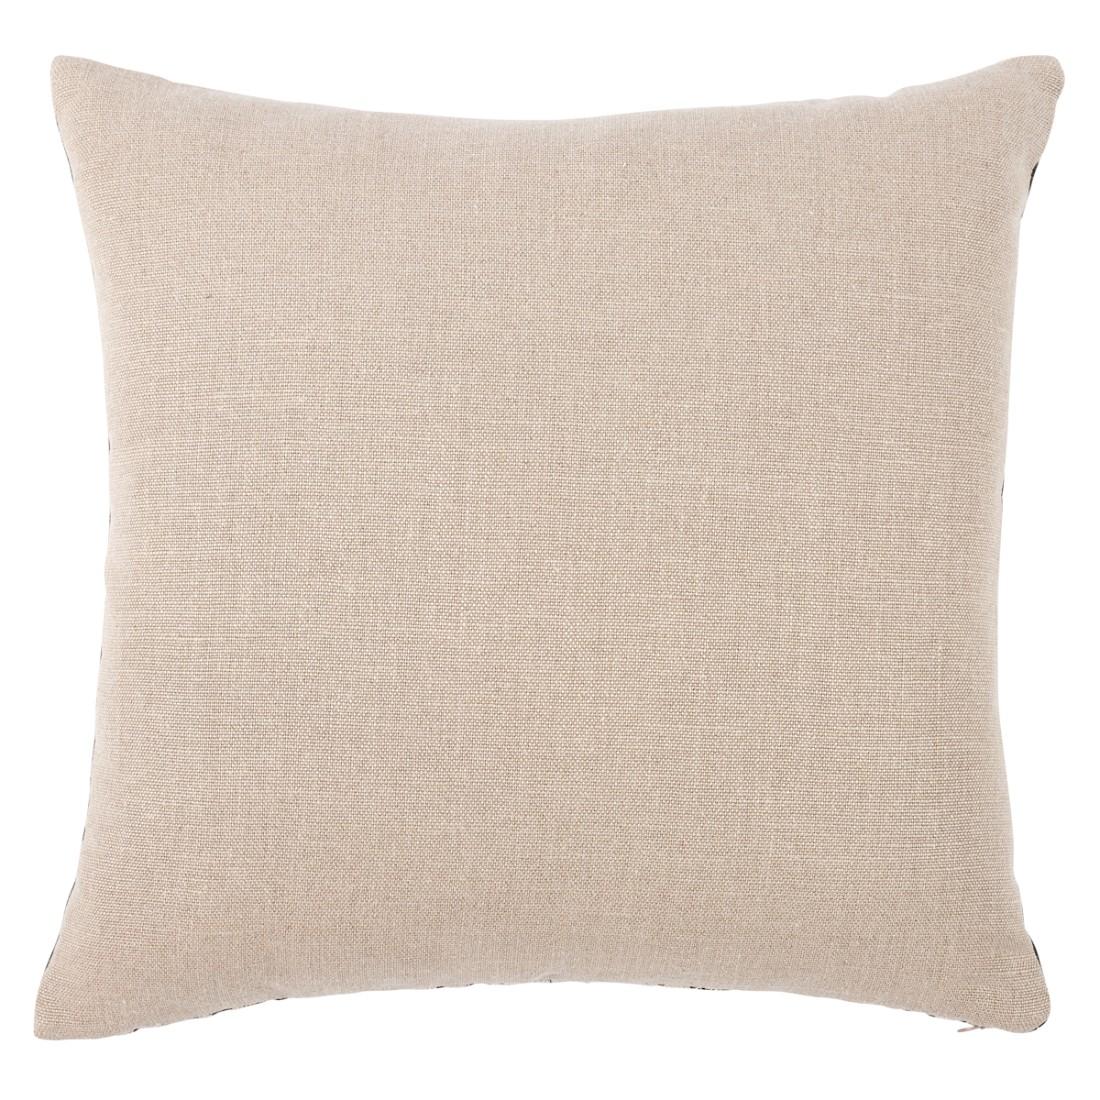 This pillow features Wentworth Embroidery with a Knife Edge finish. The embroidery has an elegant cross-stitching on jute and linen with subtle tonal variations that lend a wonderful handmade allure. Back of pillow is Piet Performance Linen. Pillow